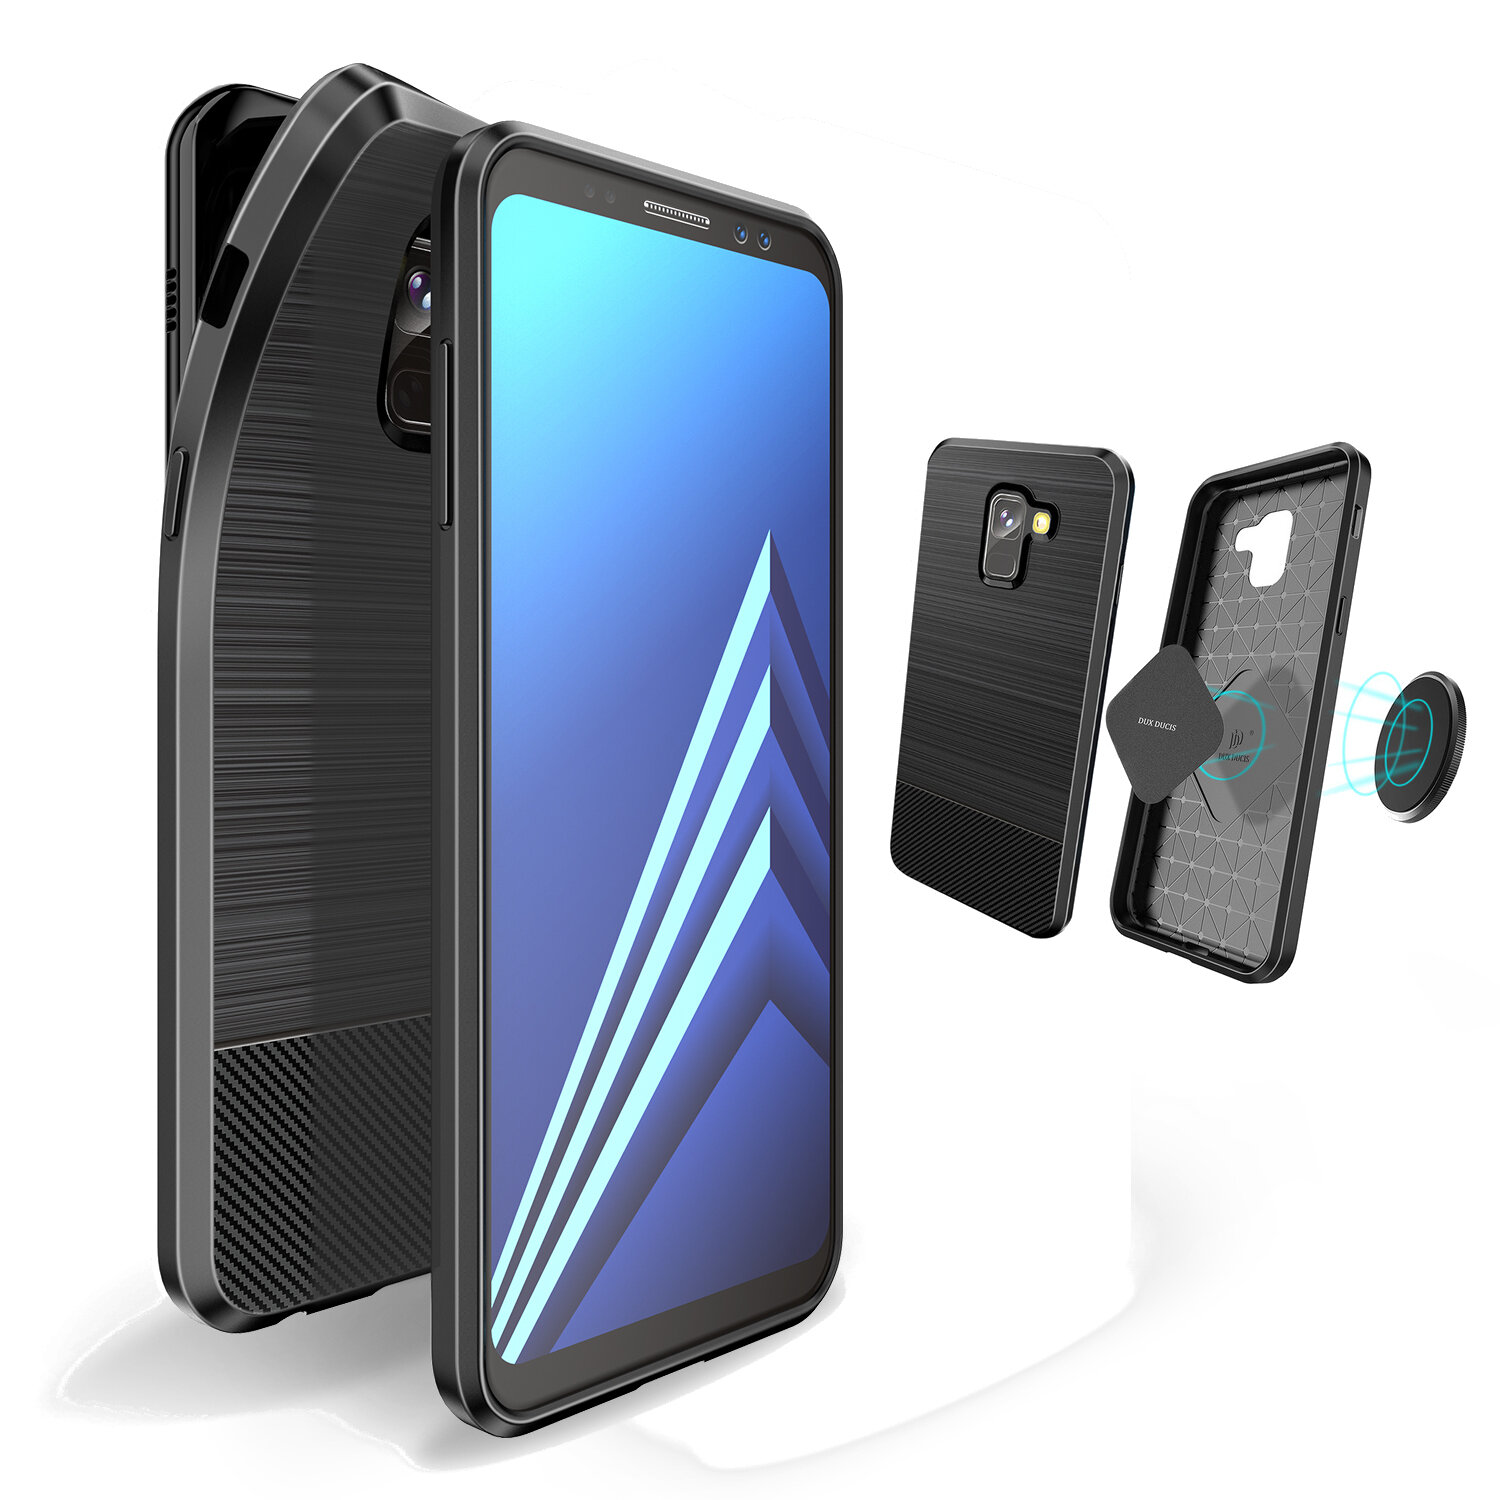 DUX DUCIS Magnetic Soft TPU Protective Case for Samsung Galaxy A8 Plus 2018